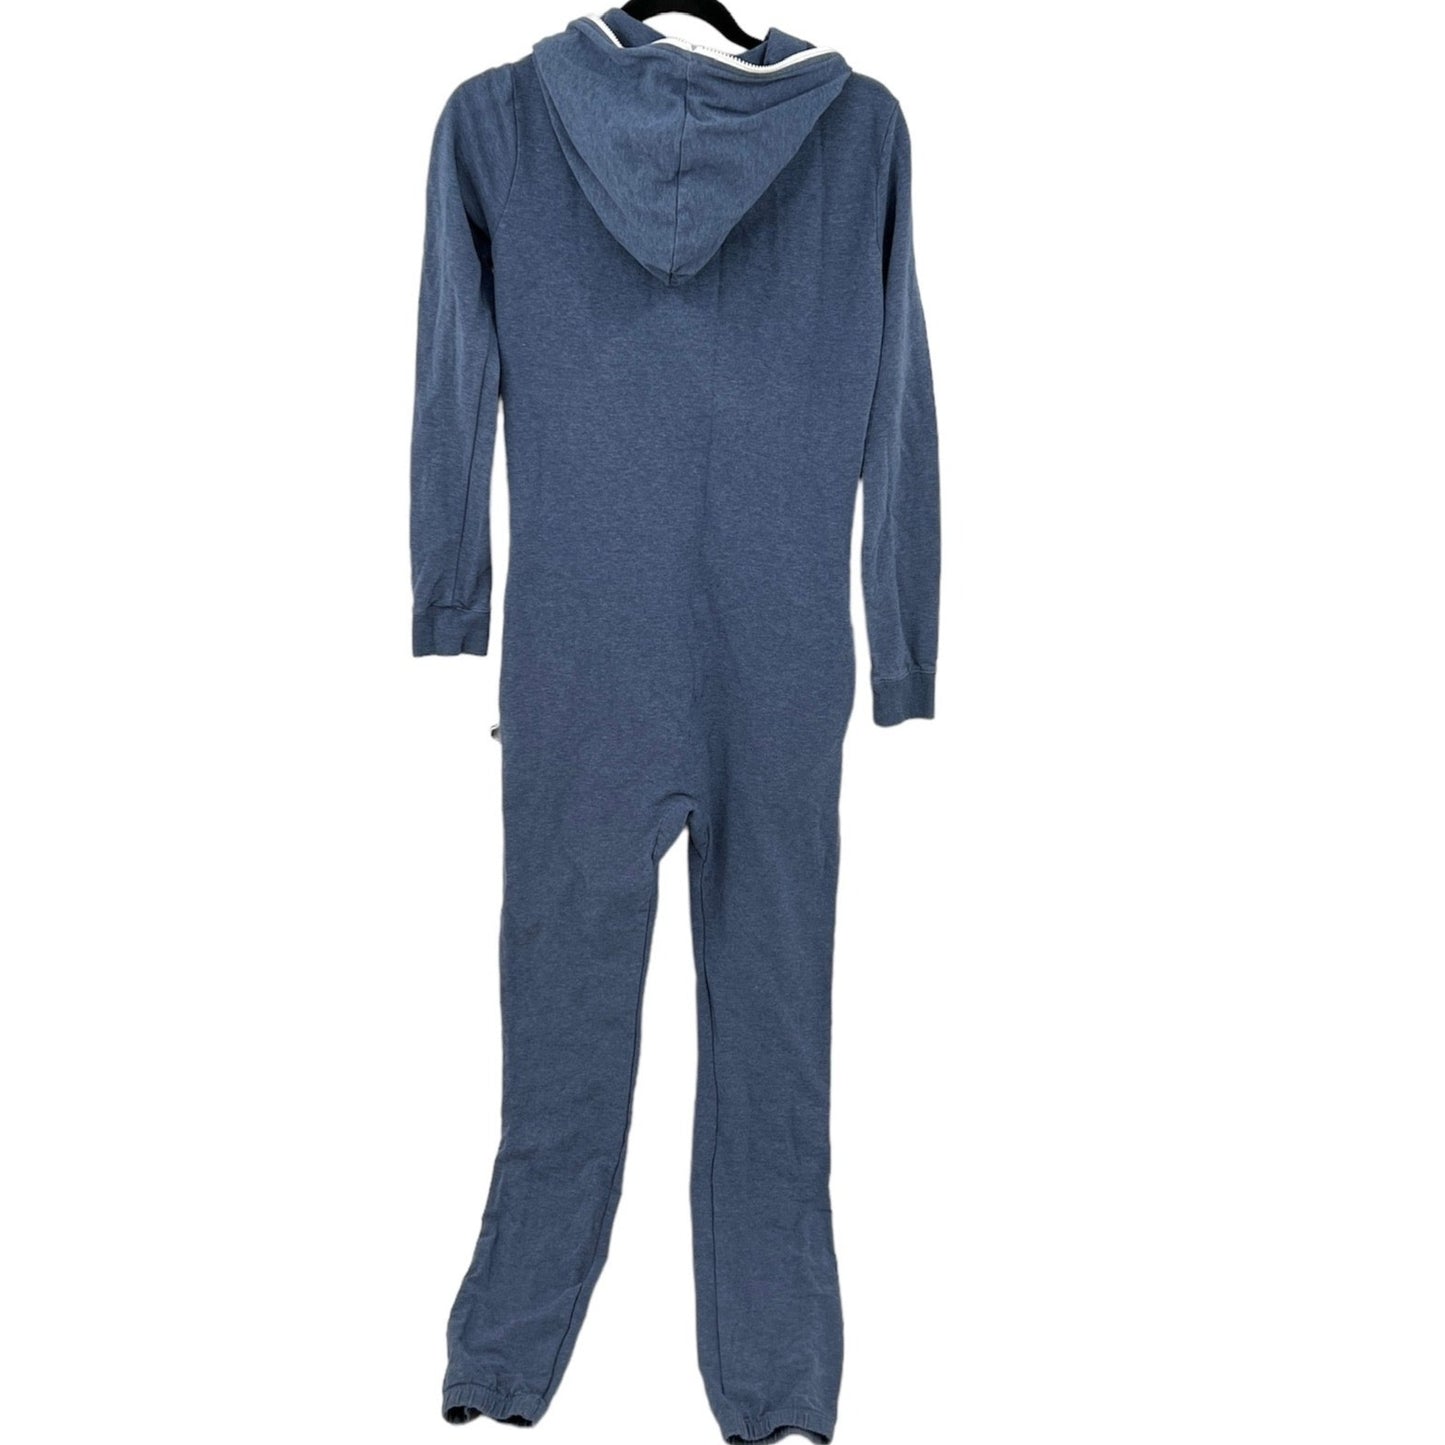 SOLD. Onepiece Fitted Onesies M